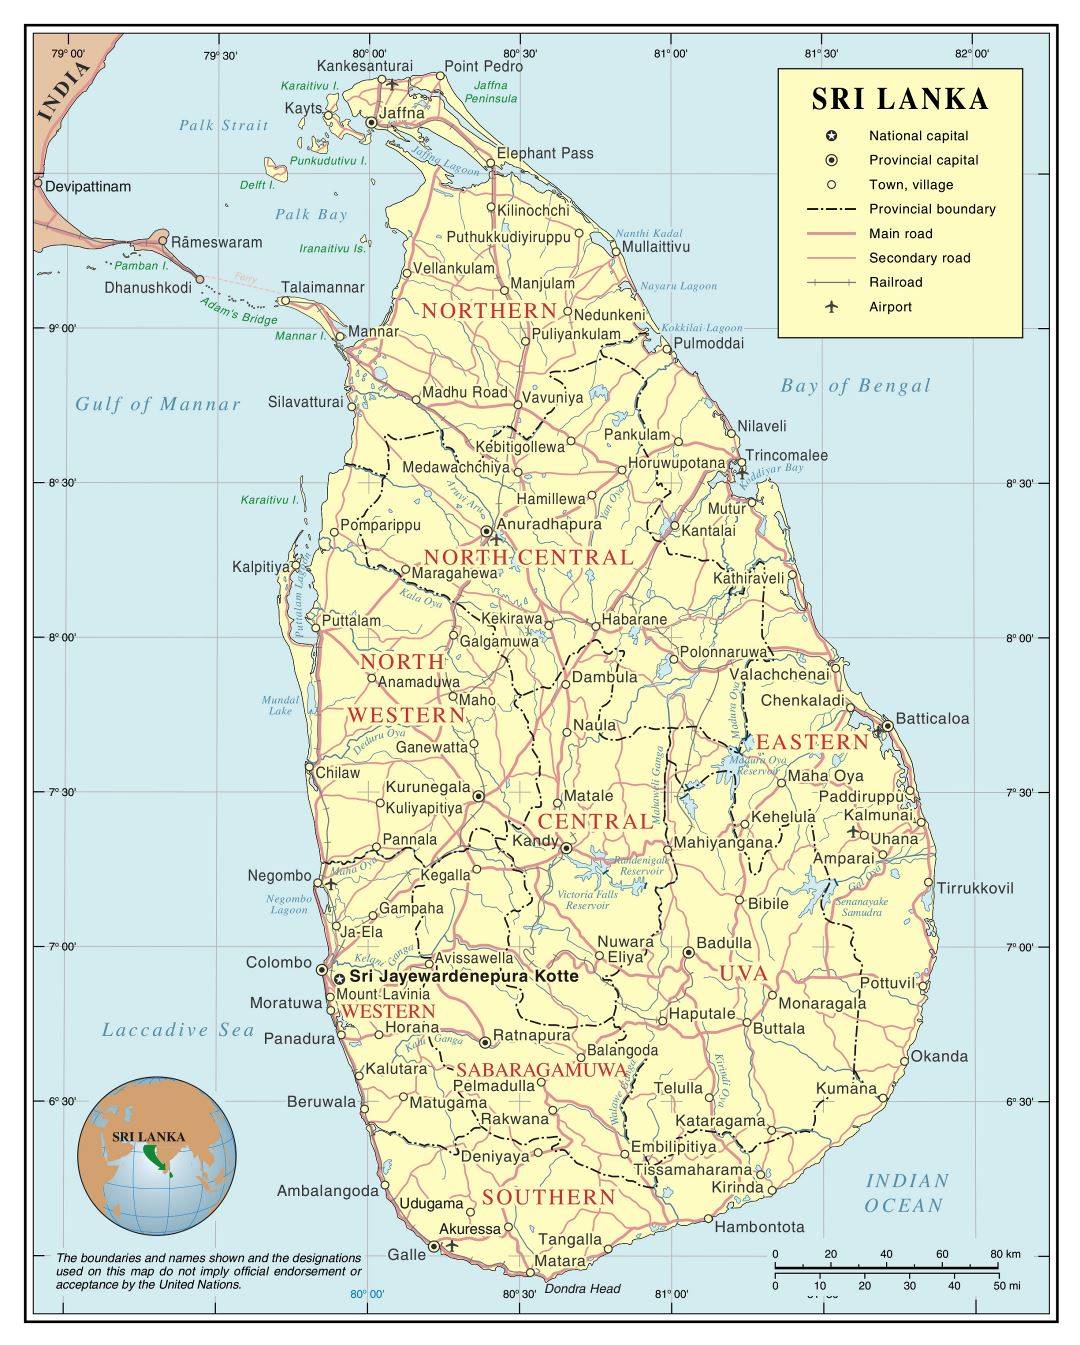 Large Detailed Political And Administrative Map Of Sri Lanka With Roads Railroads Cities And